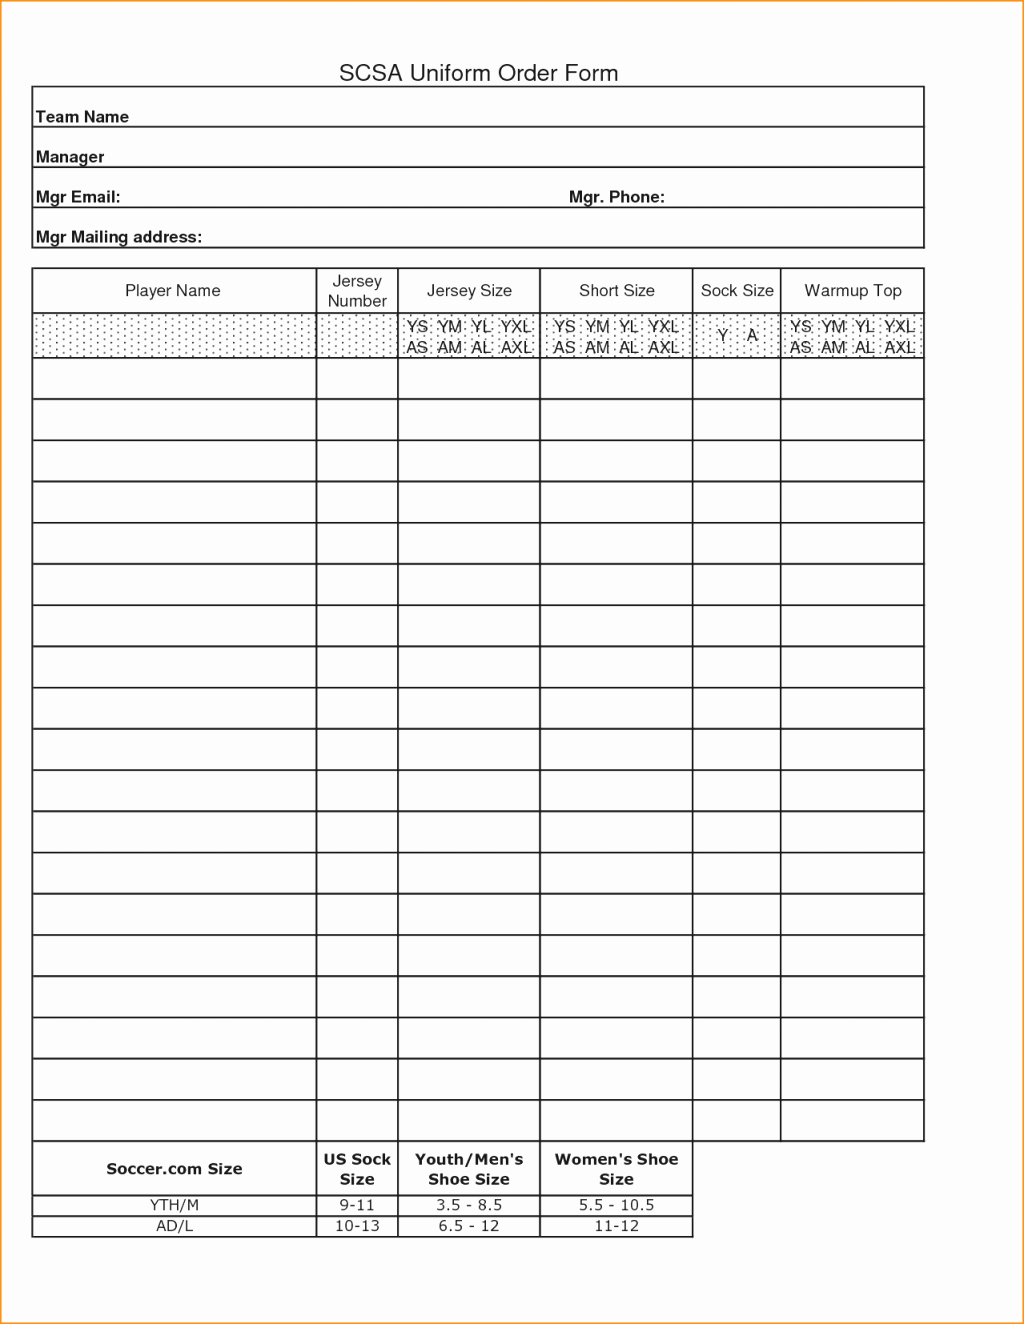 Fundraiser form Template Free Inspirational Fundraising forms Templates Free Sample Business Loan